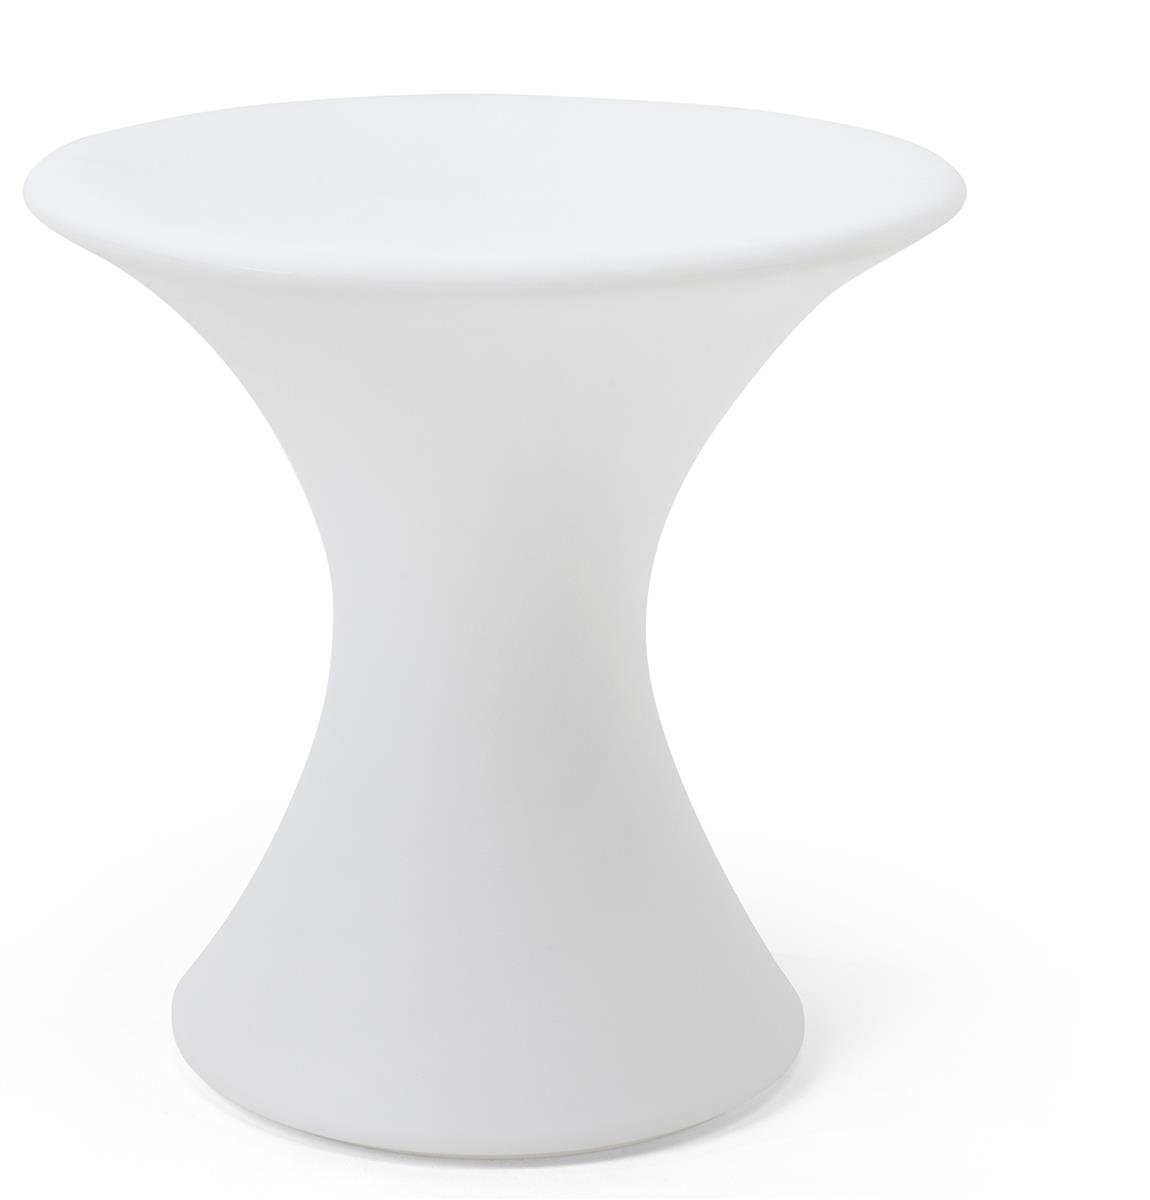 LED cocktail table with 23.5-inch diameter top